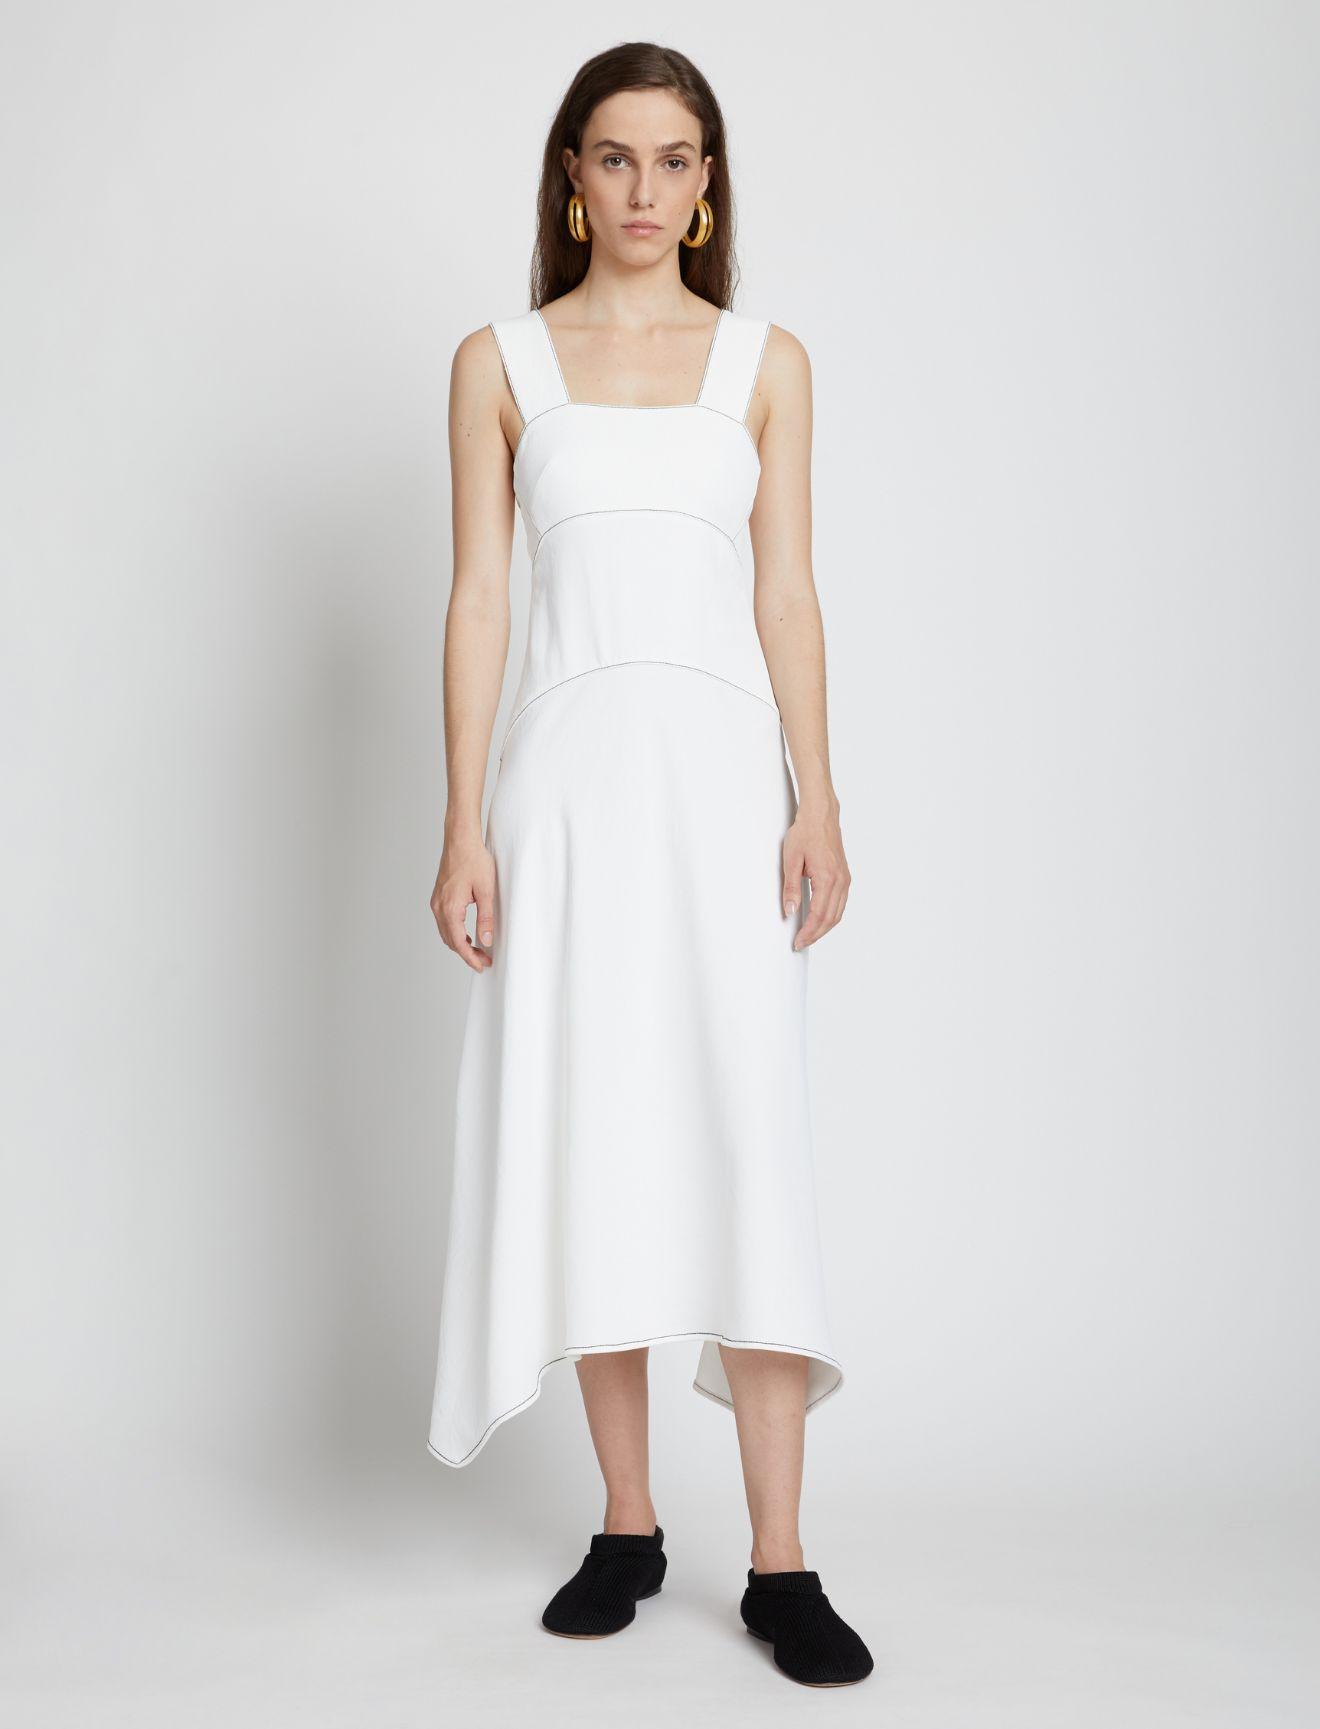 PROENZA SCHOULER WHITE LABEL Synthetic Rumpled Pique Dress in White - Lyst